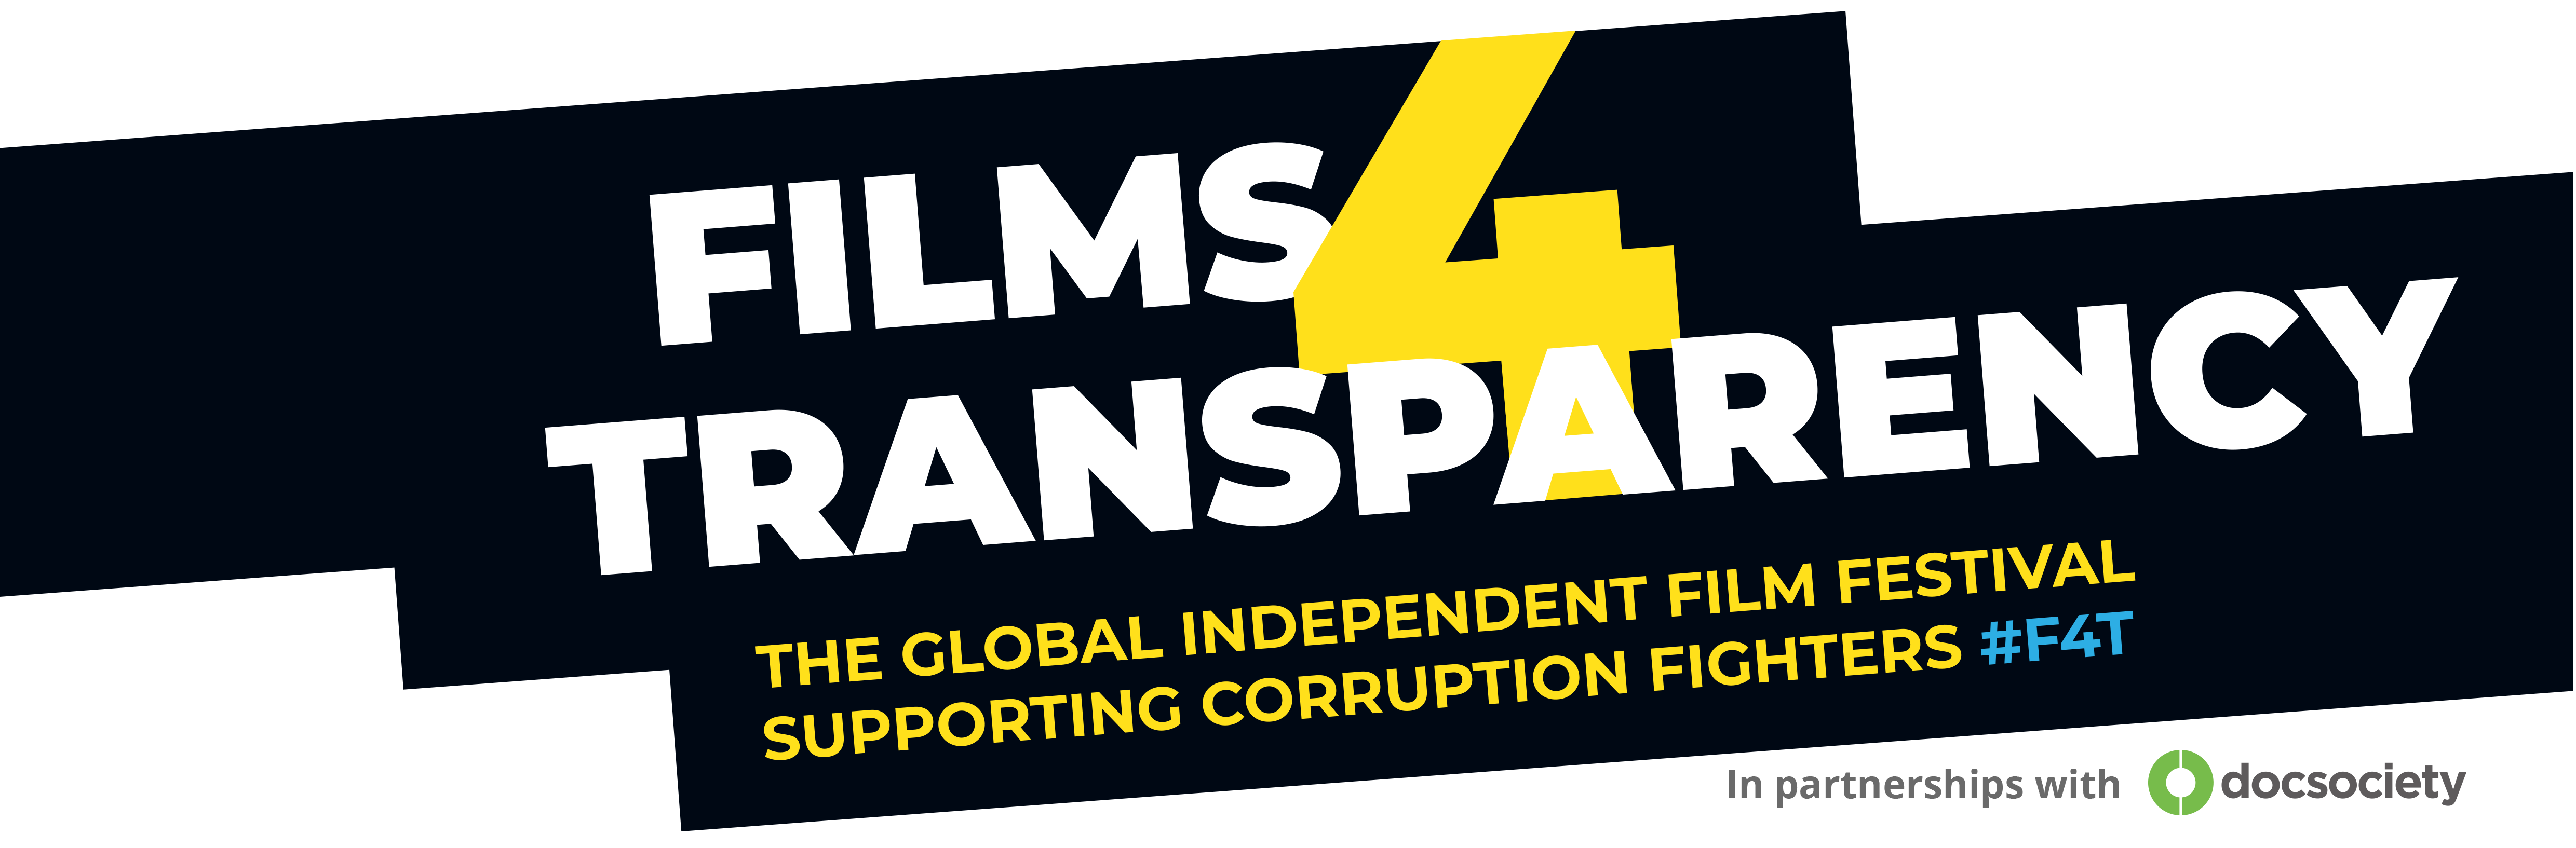 Films for Transparency - IACC Series